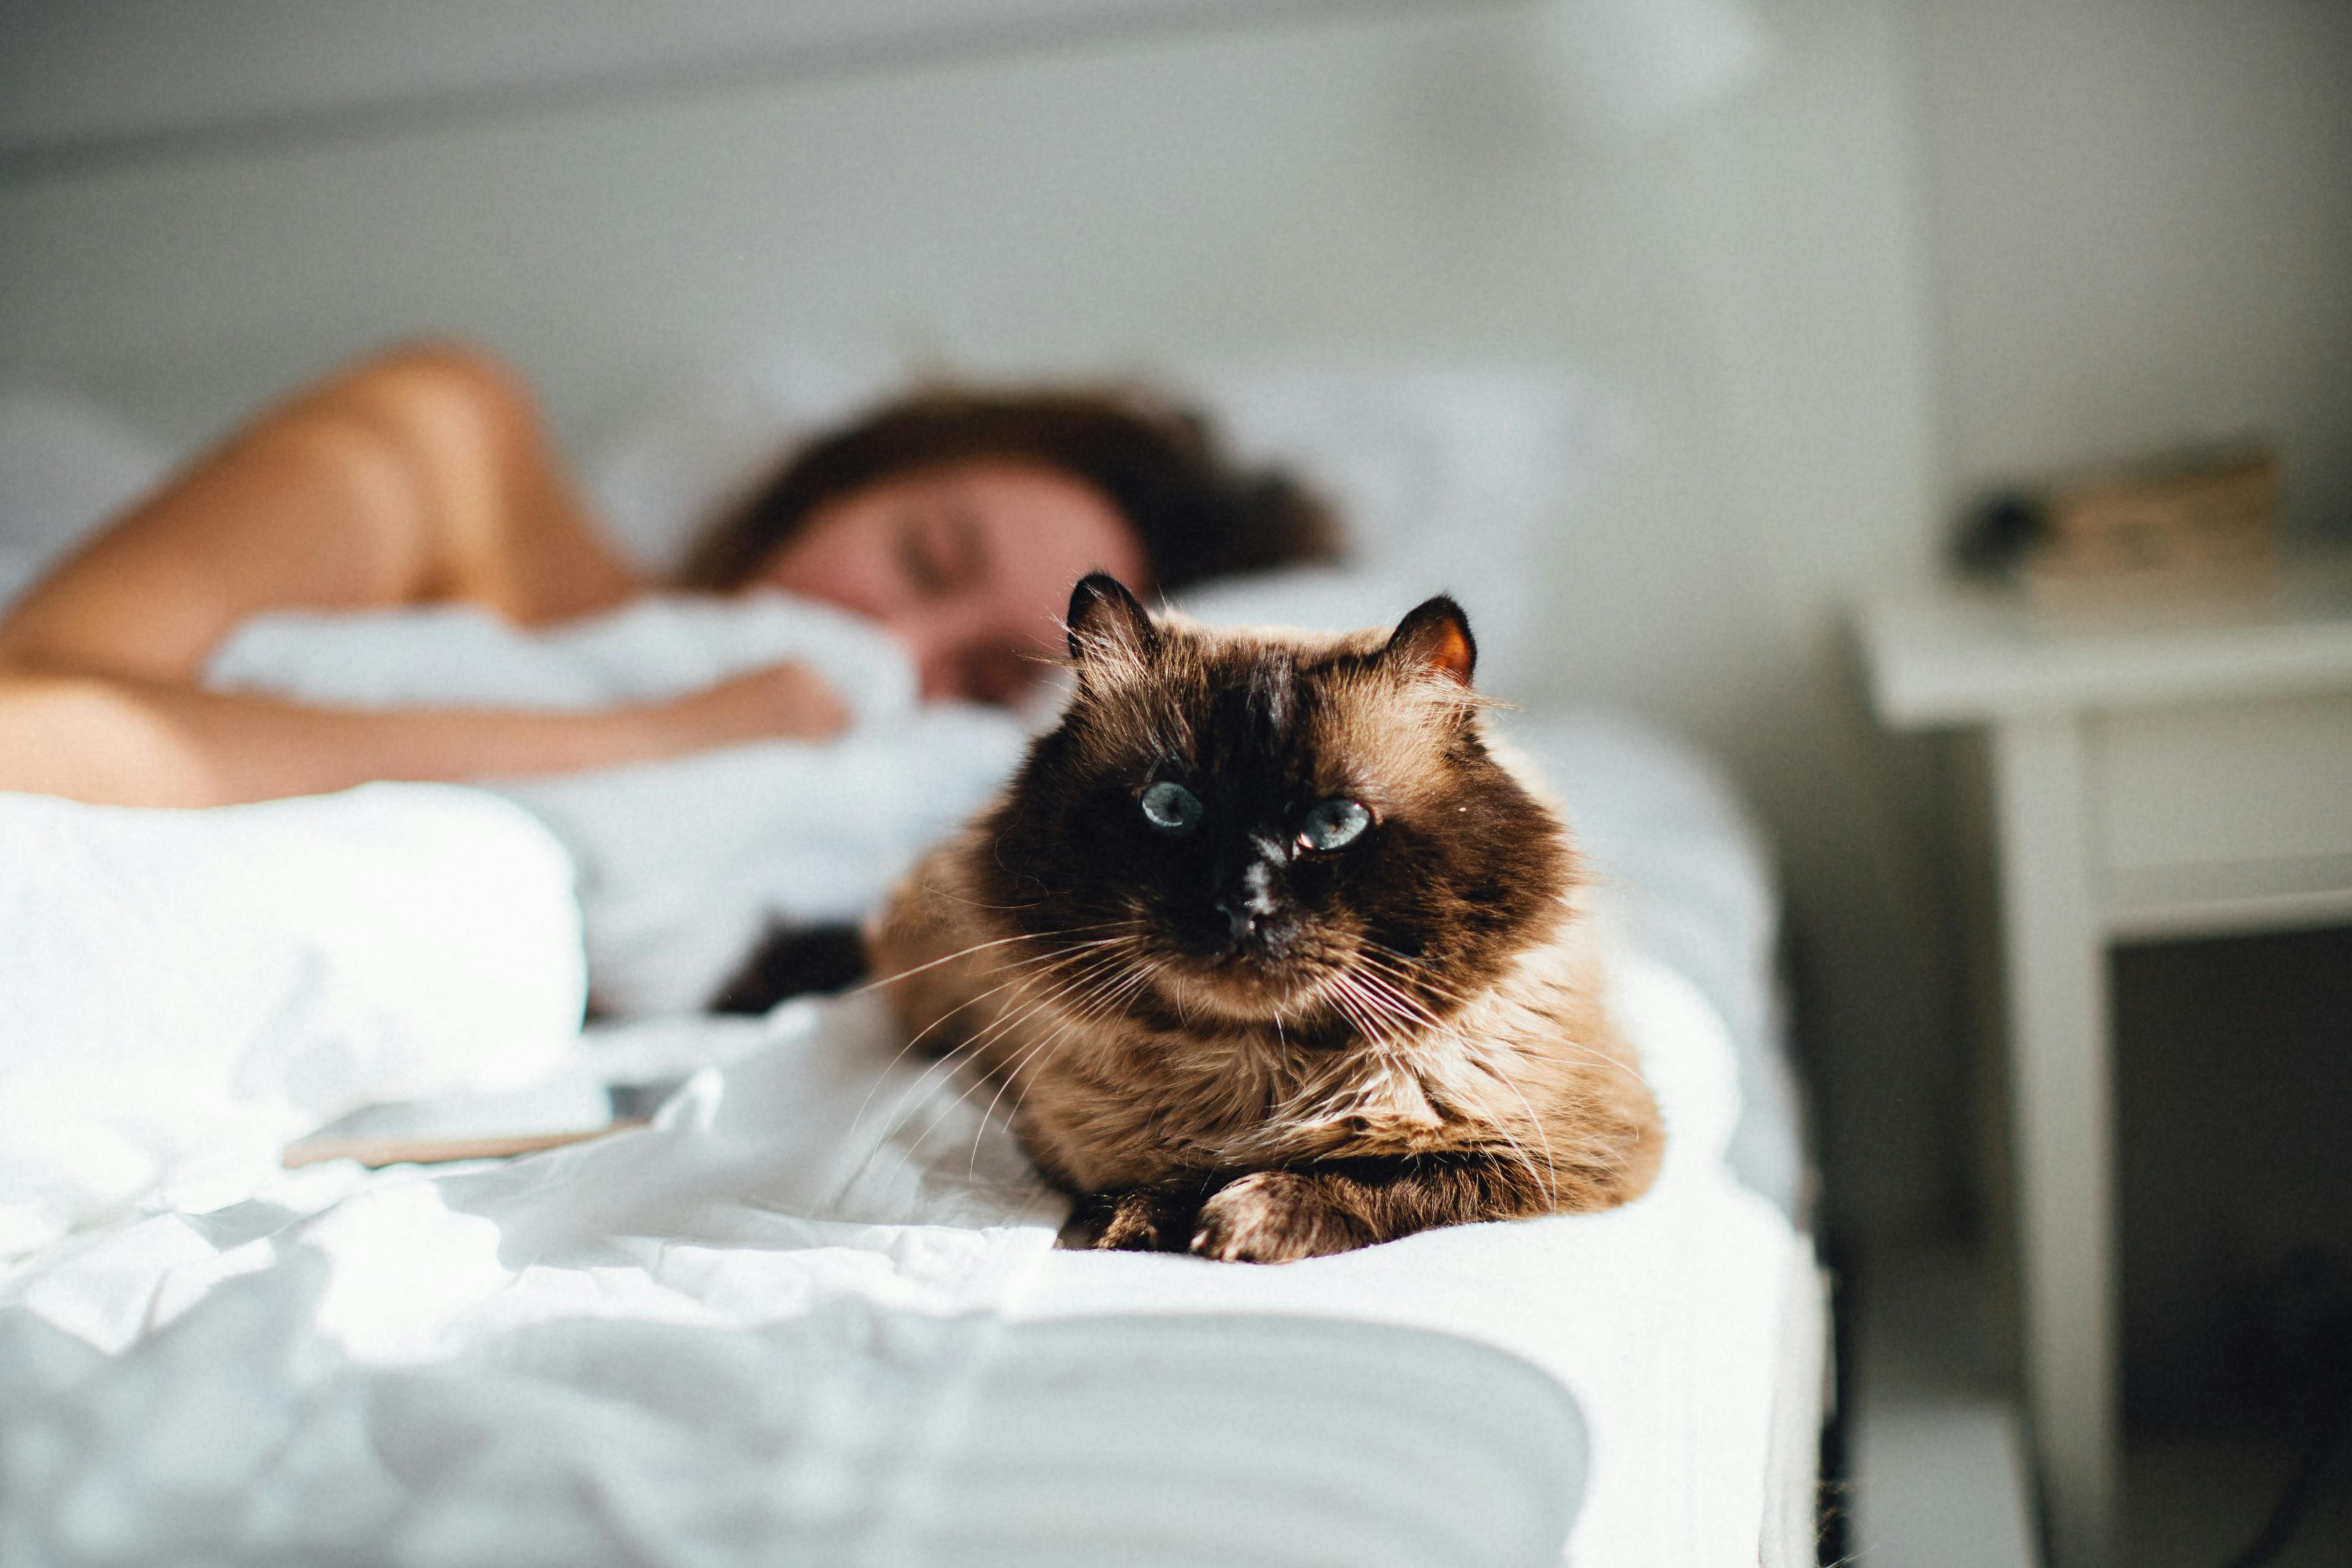  Sleeping with Cats: Why Does My Cat Sleep On Me?